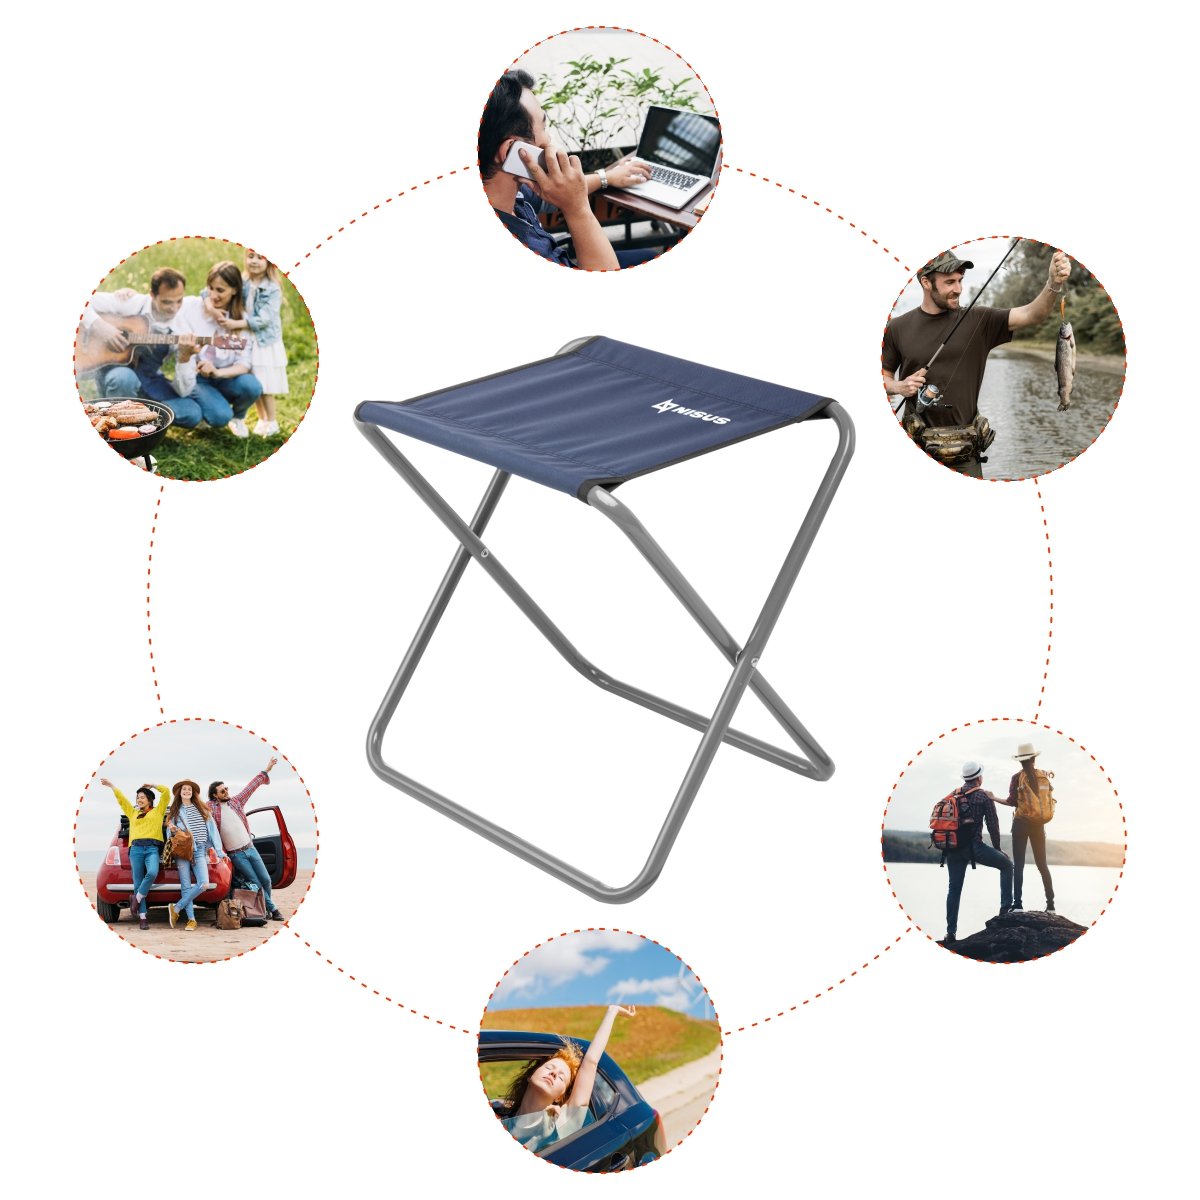 Nisus Blue Folding Stool where could be used infographics